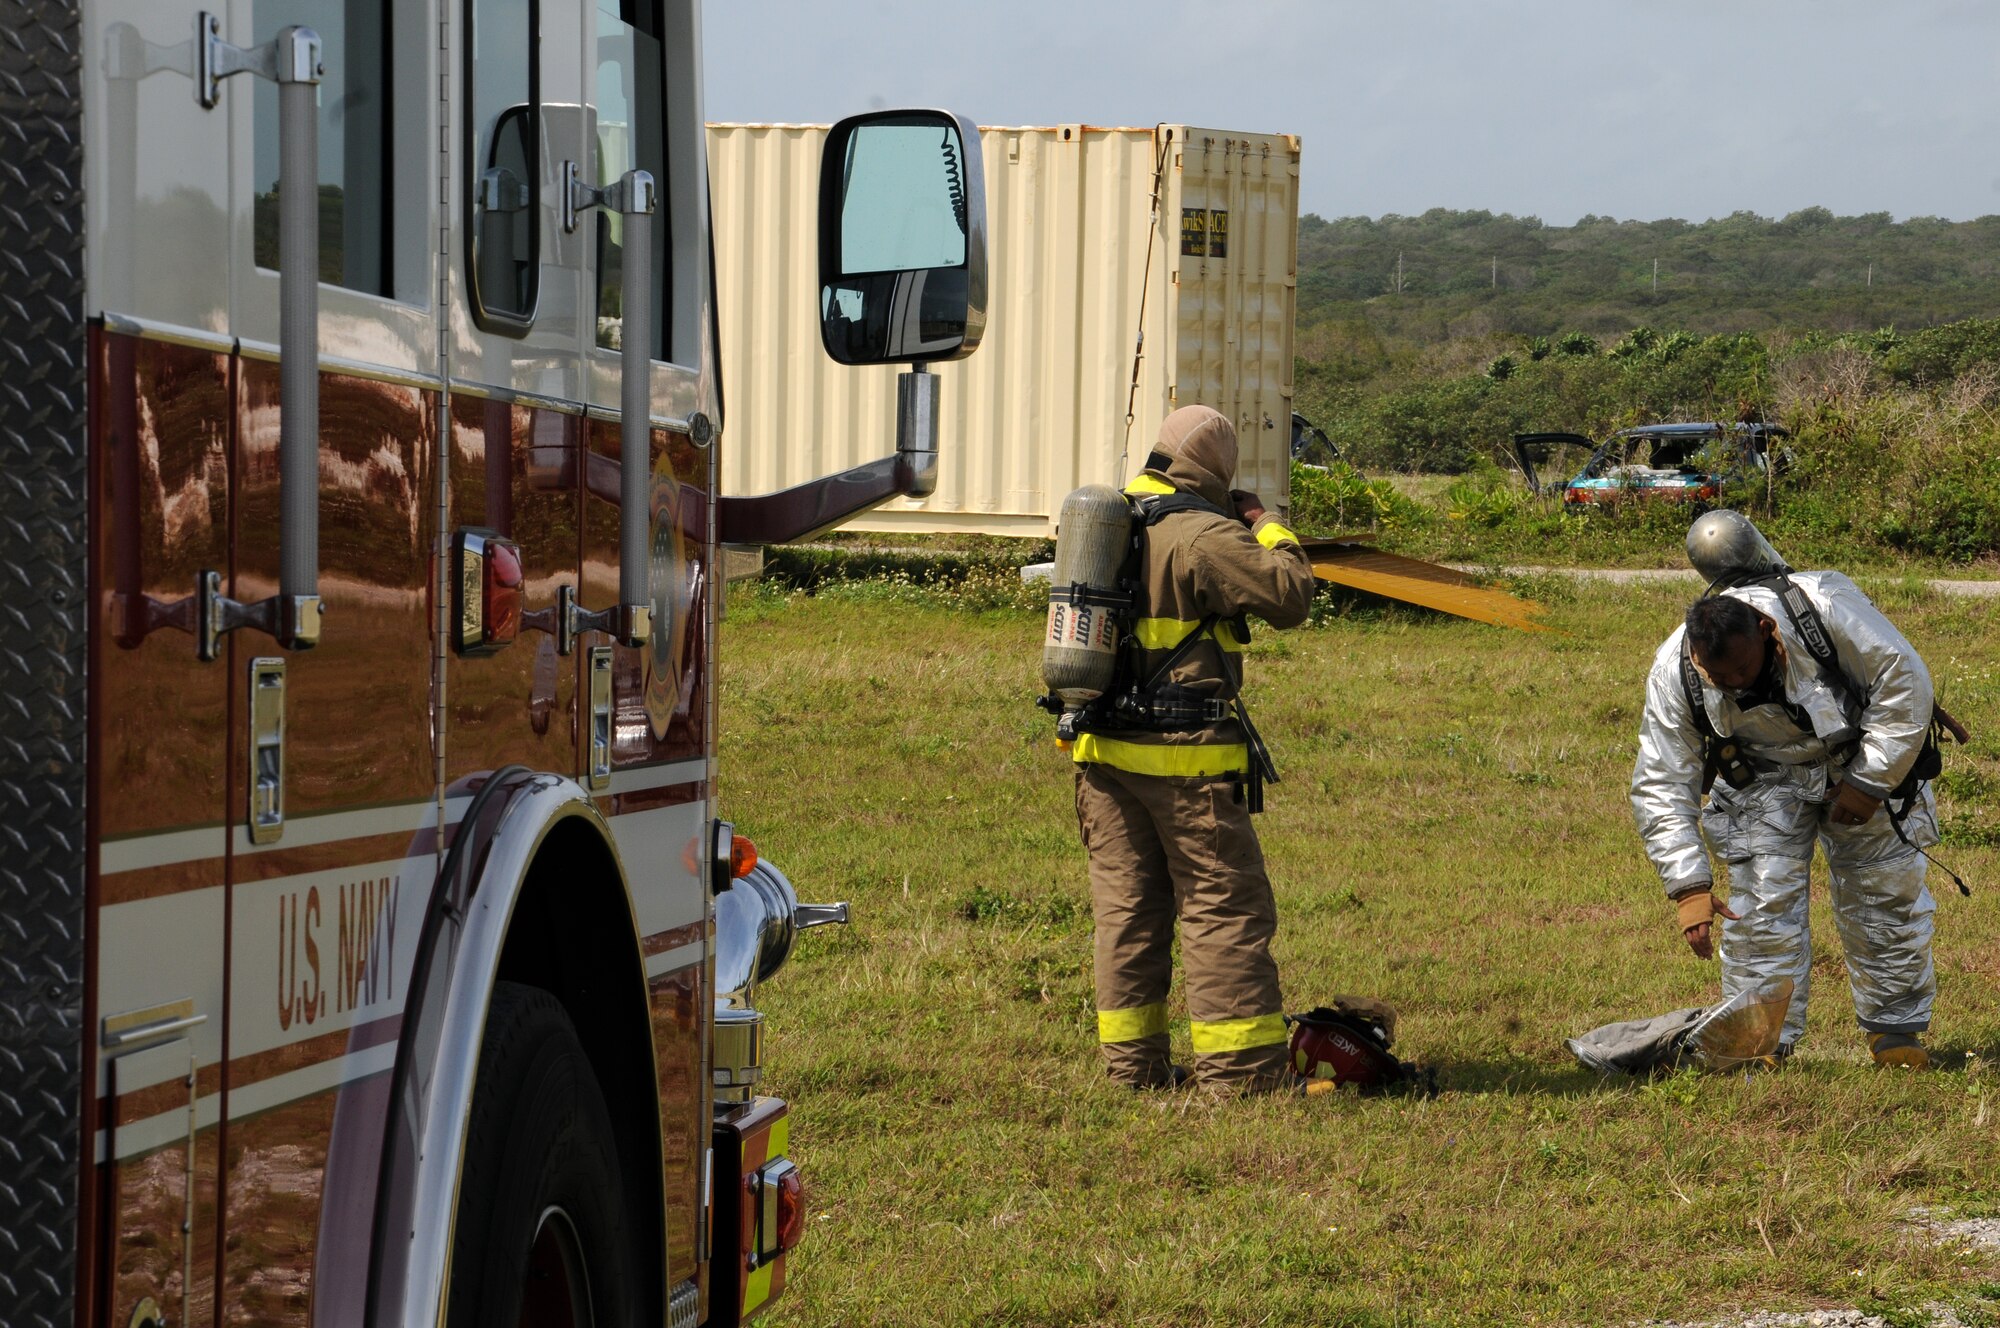 Tech. Sgt. Richard Benavente (right), 36th Civil Engineer Squadron Fire and Emergency Services NCO  in charge of training, and a Saipan fire officer suit up before a structural fire exercise on Andersen Air Force Base, Guam, March 27, 2013. Andersen Fire and Emergency Services personnel hosted four Saipan fire officers for joint fire training during their visit to Guam March 25-29. (U.S. Air Force photo by Staff Sgt. Melissa B. White/Released)